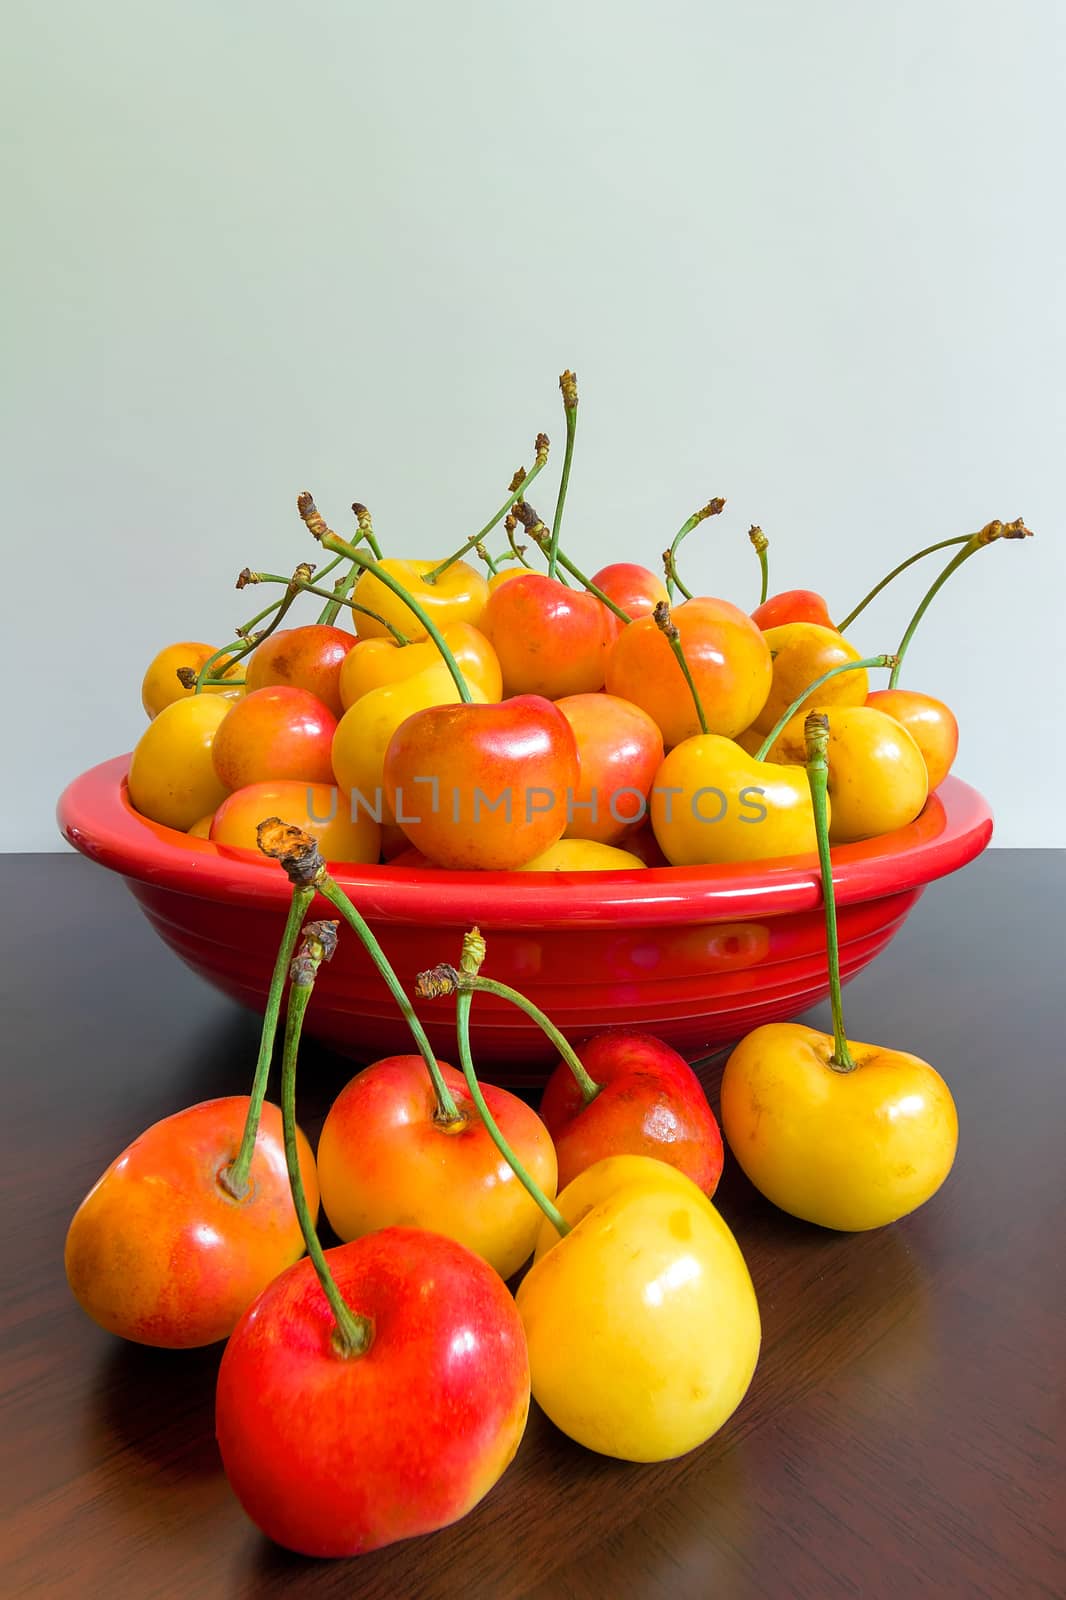 Pile of Rainier Cherries in a red bowl sitting on a wooden table